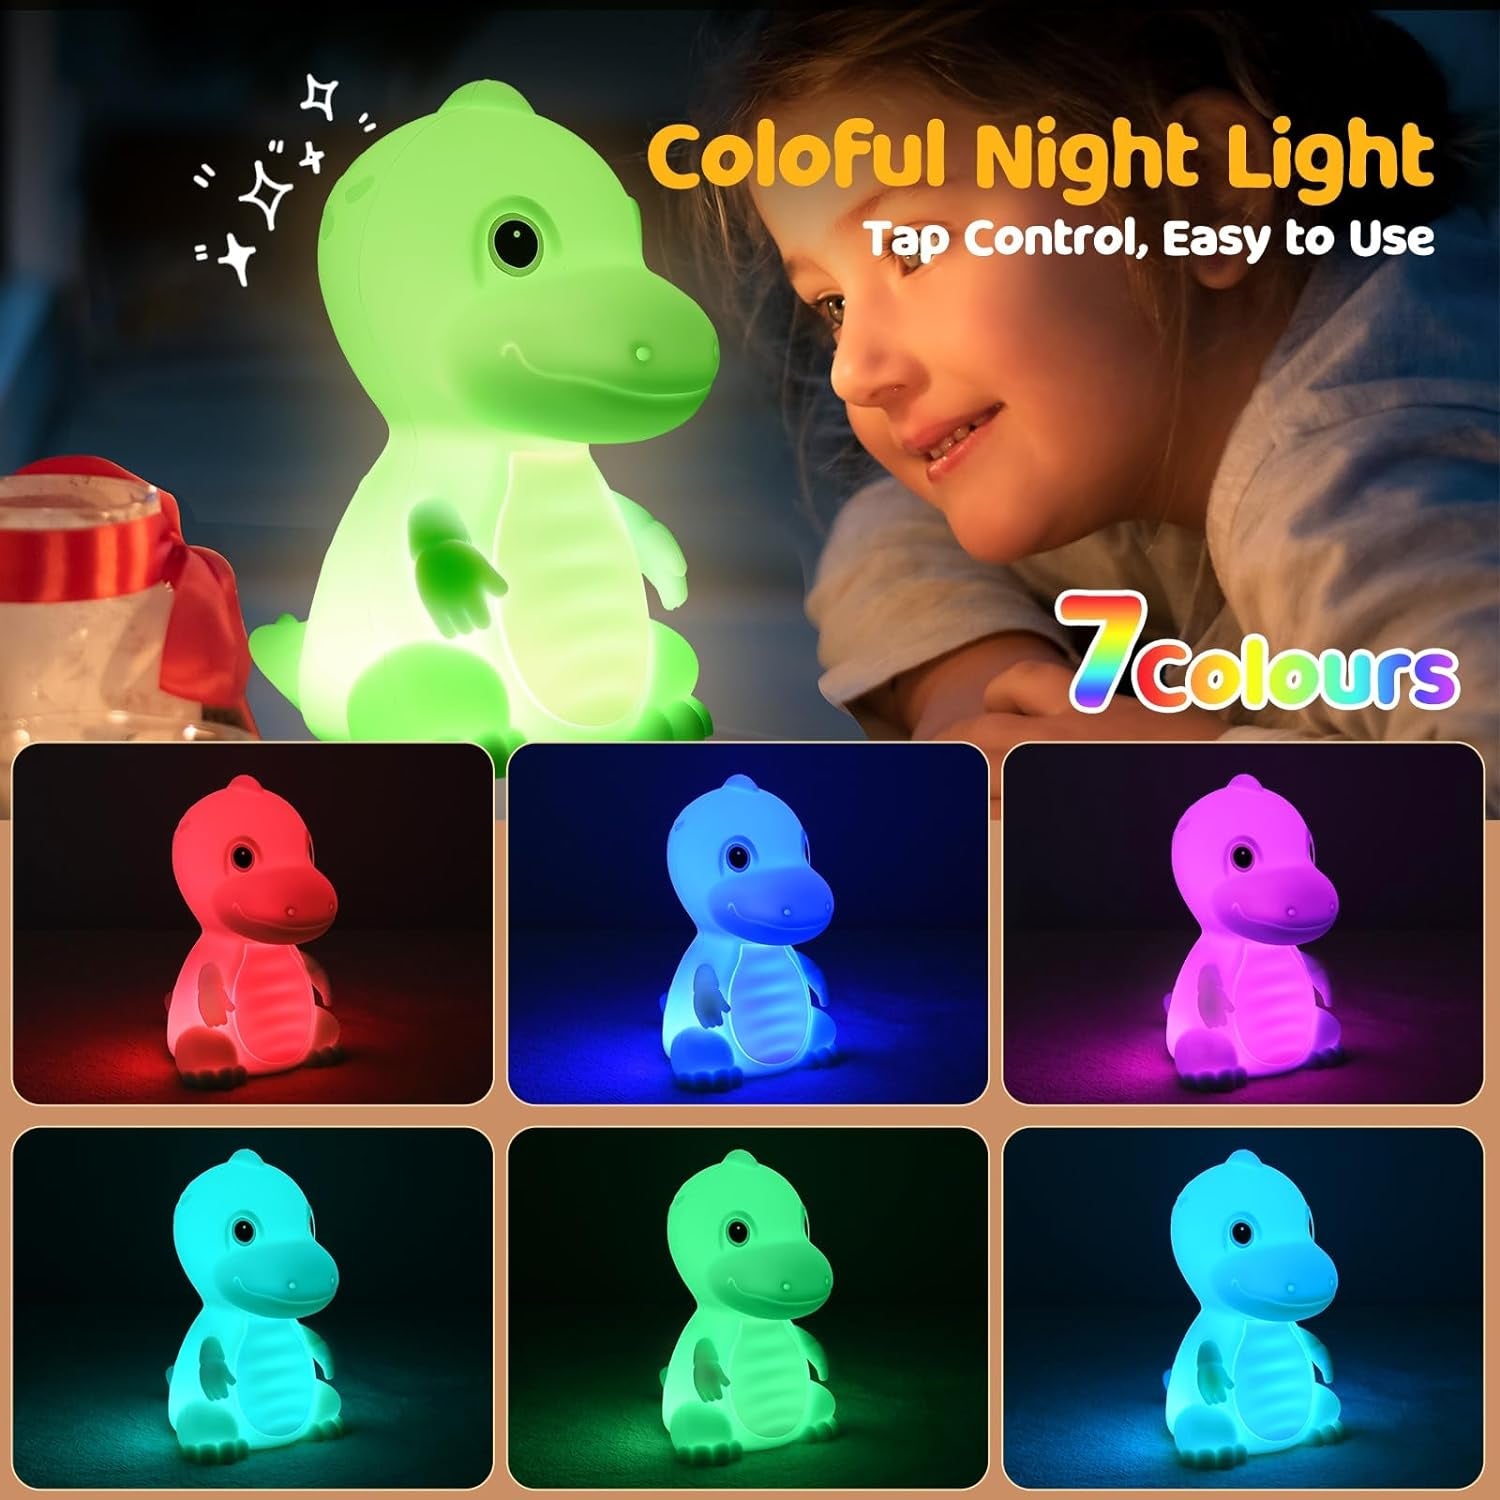 Dinosaurs Night Light for Kids 30Min Timer Control, Silicone Touch Bedroom Baby Night Lamp, Rechargeable Battery LED Nursery Nightlight, Cute Room Decor Gift for Women Baby (Green)